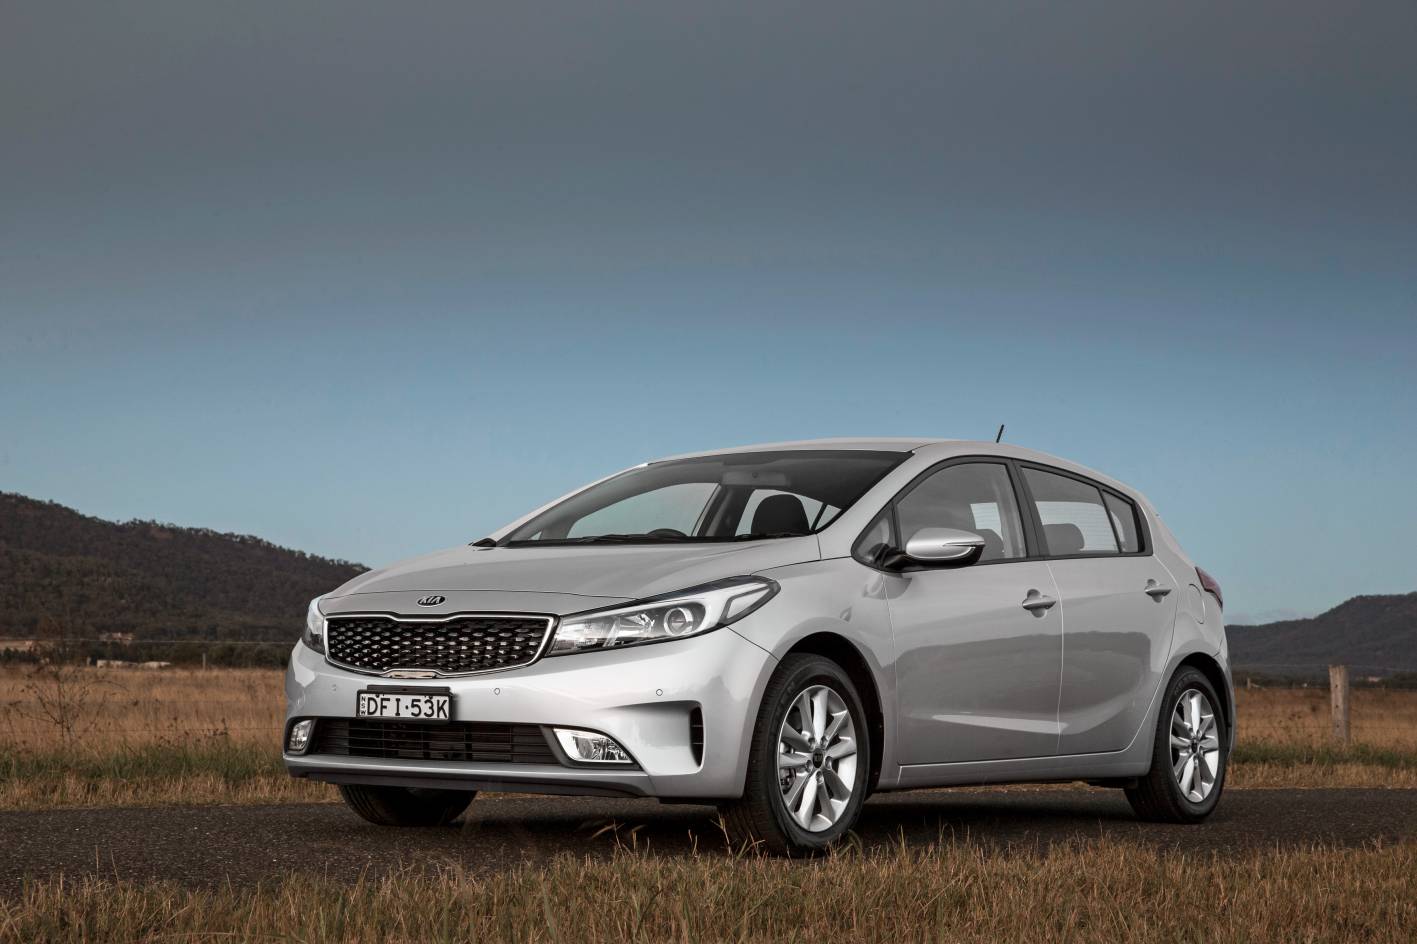 Kia News: 2017 Kia Cerato updated with more tech and safety